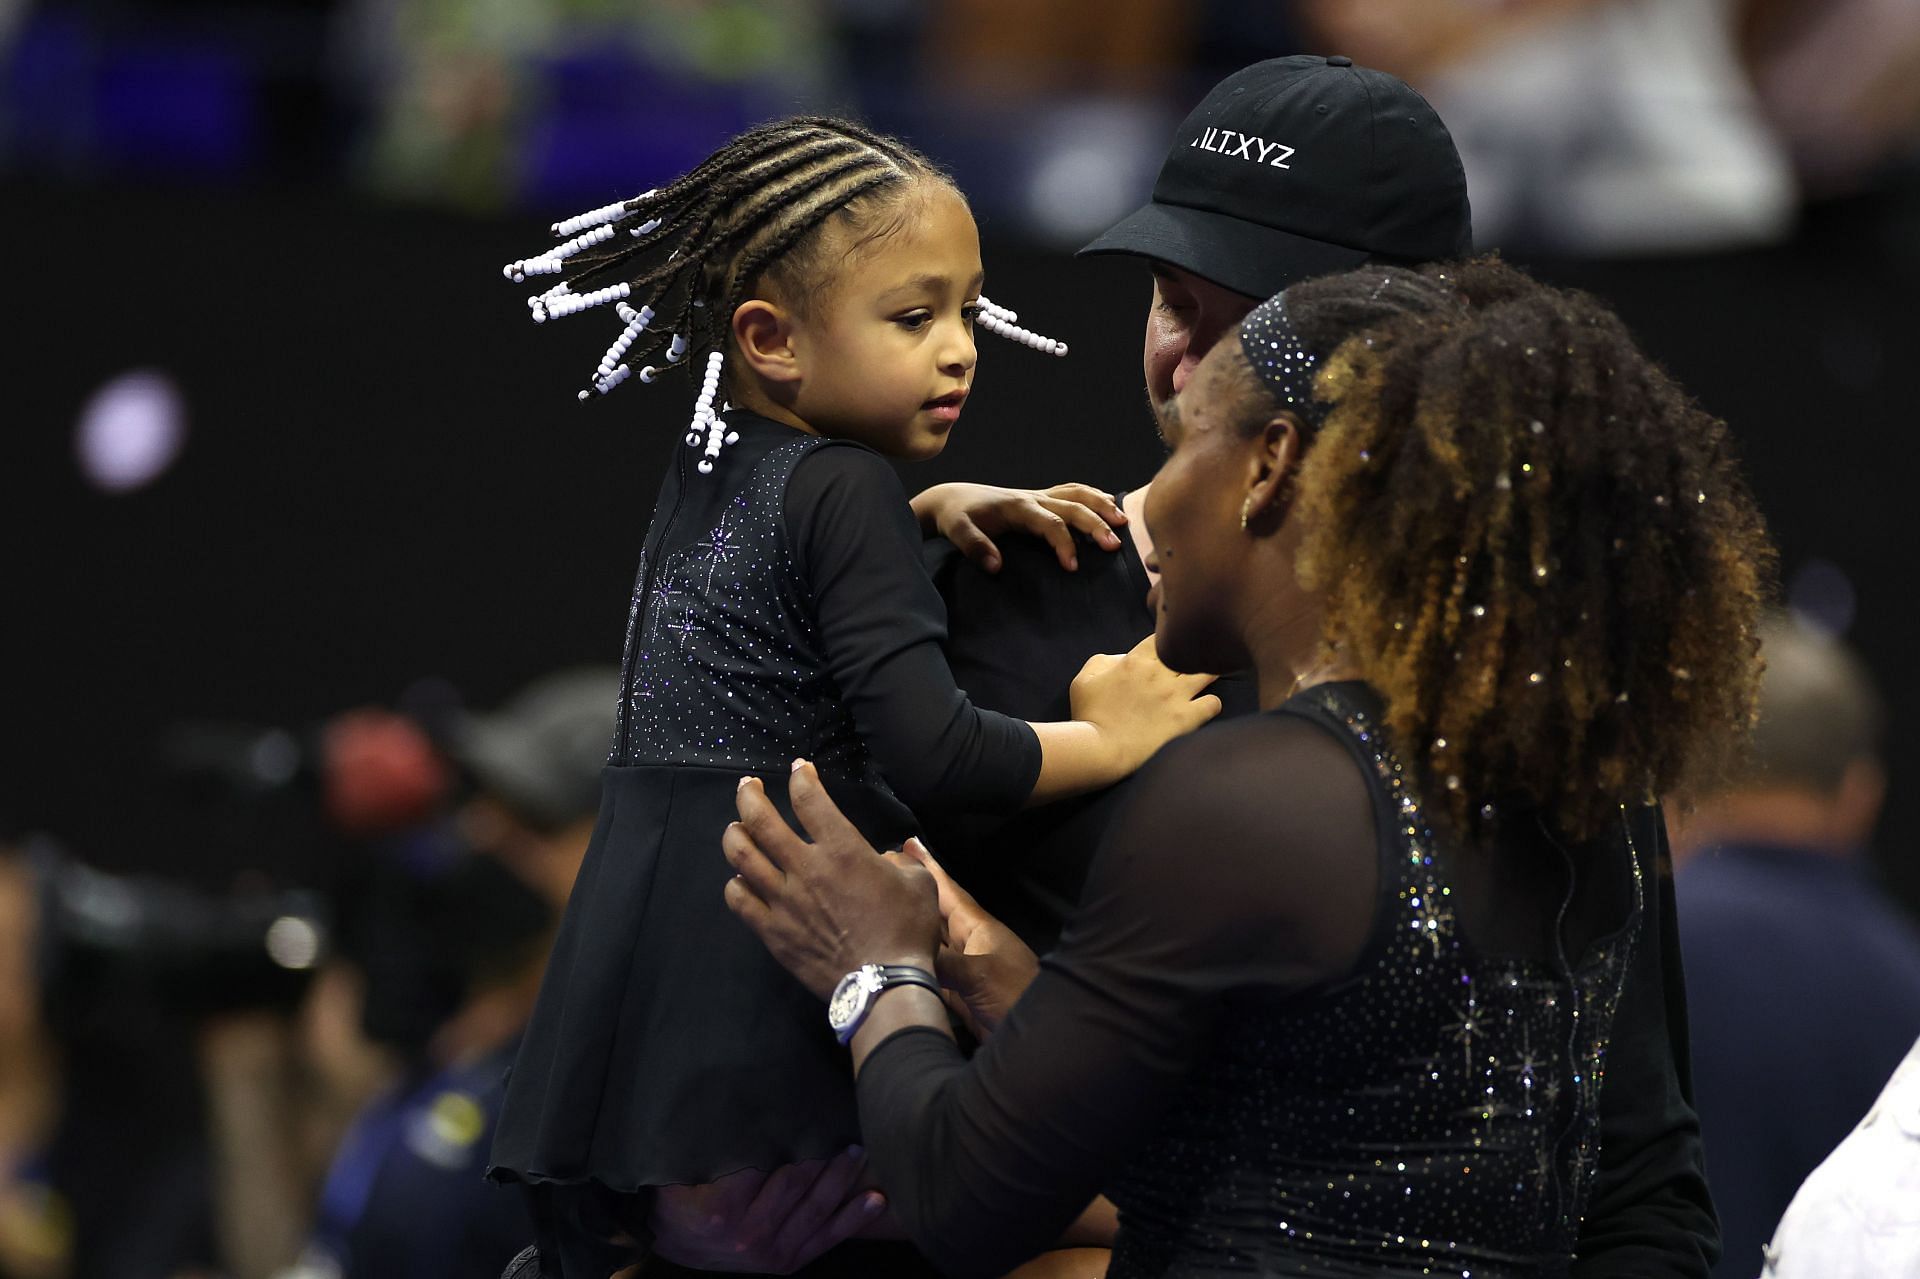 Serena Williams, Alexis Ohanian, and their daughter Olympia at the 2022 US Open - Day 1